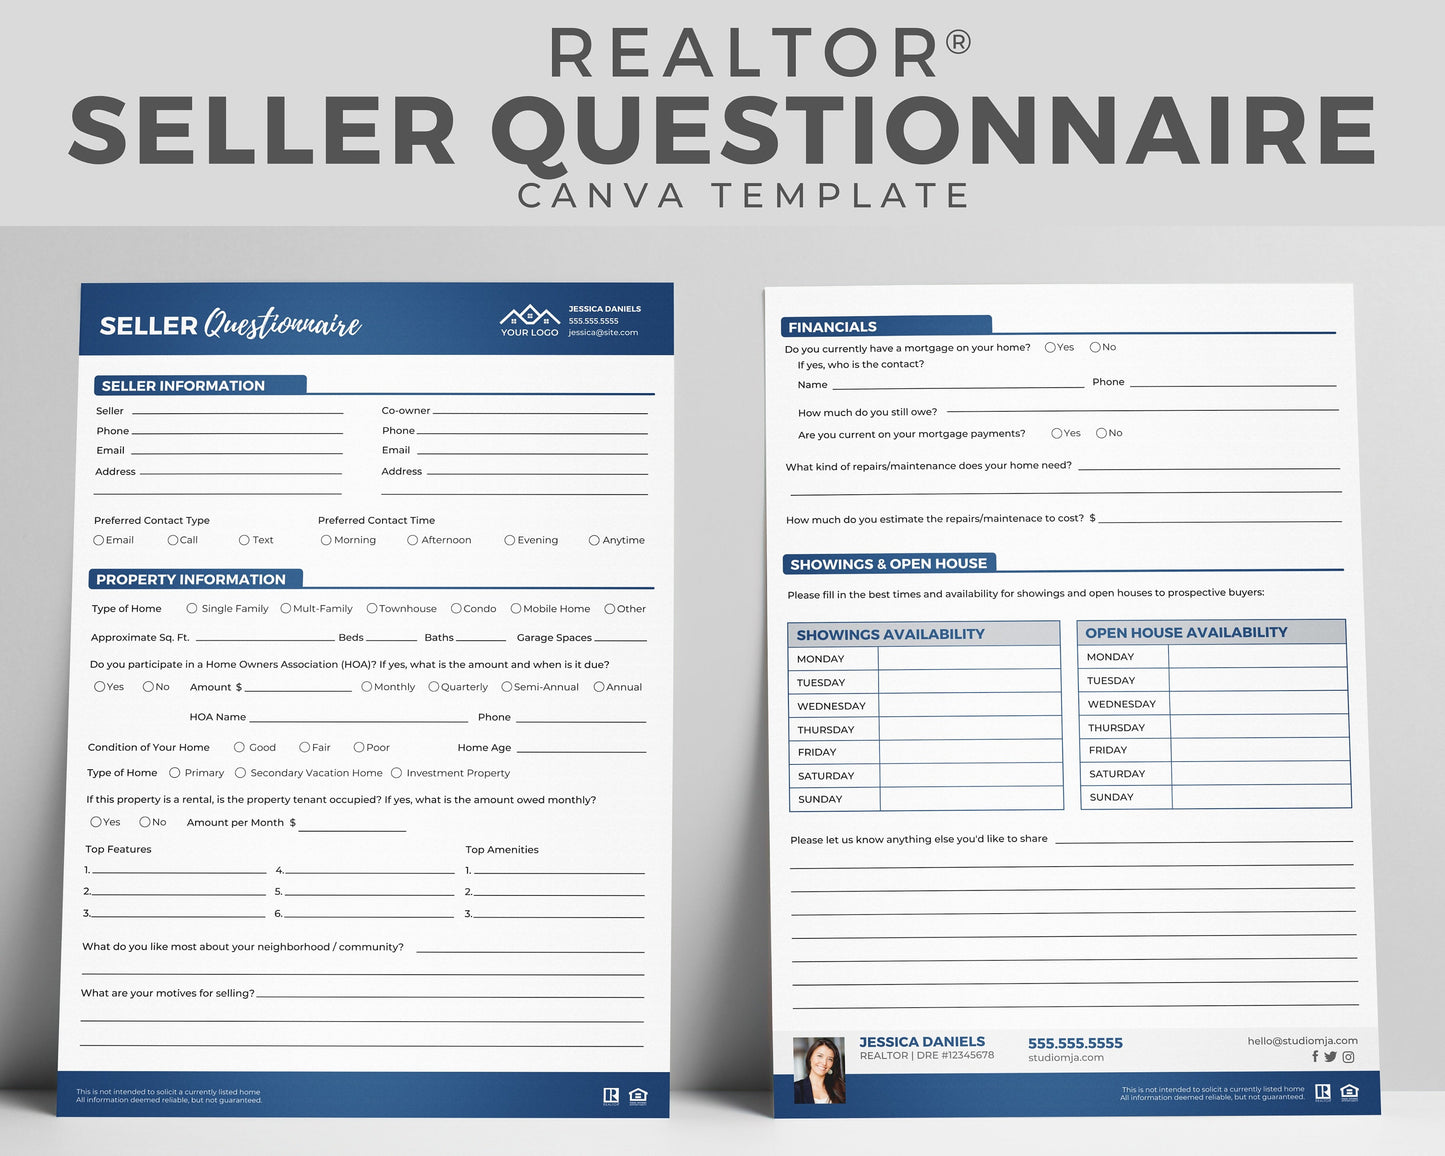 Real Estate Home Buyer's Questionnaire, Seller Questionnaire, Printable, Real Estate Buyer's Guide, Canva Template, Buyer's Checklist